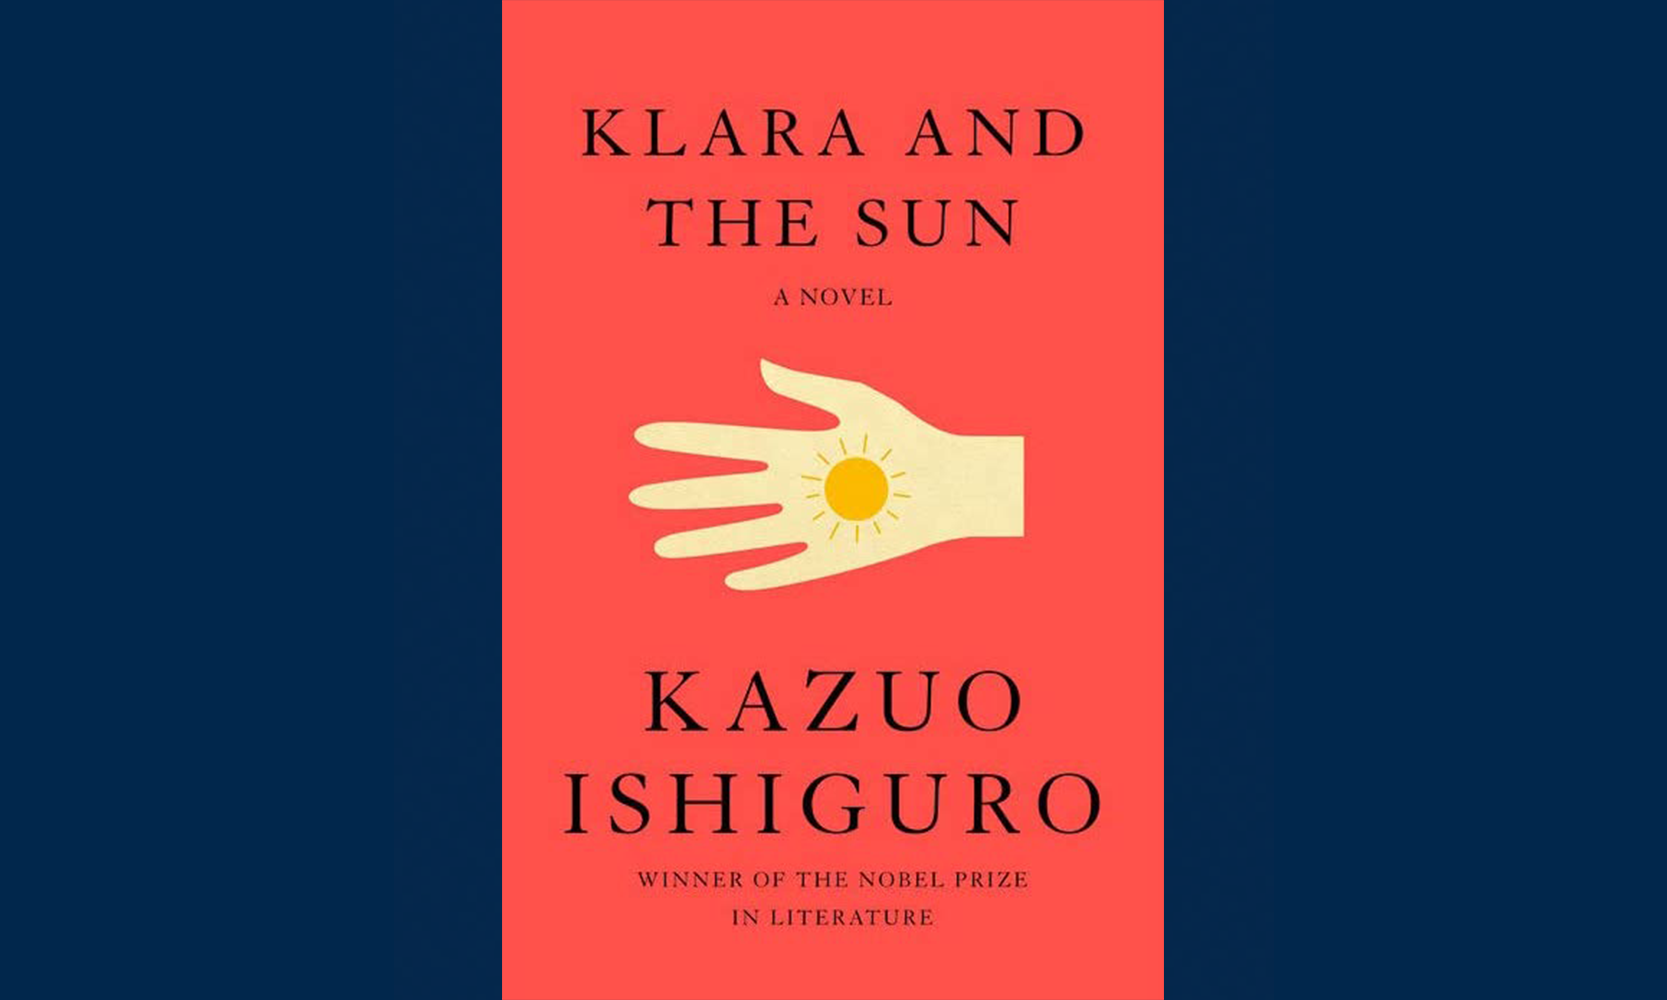 Cover of Klara and the Sun